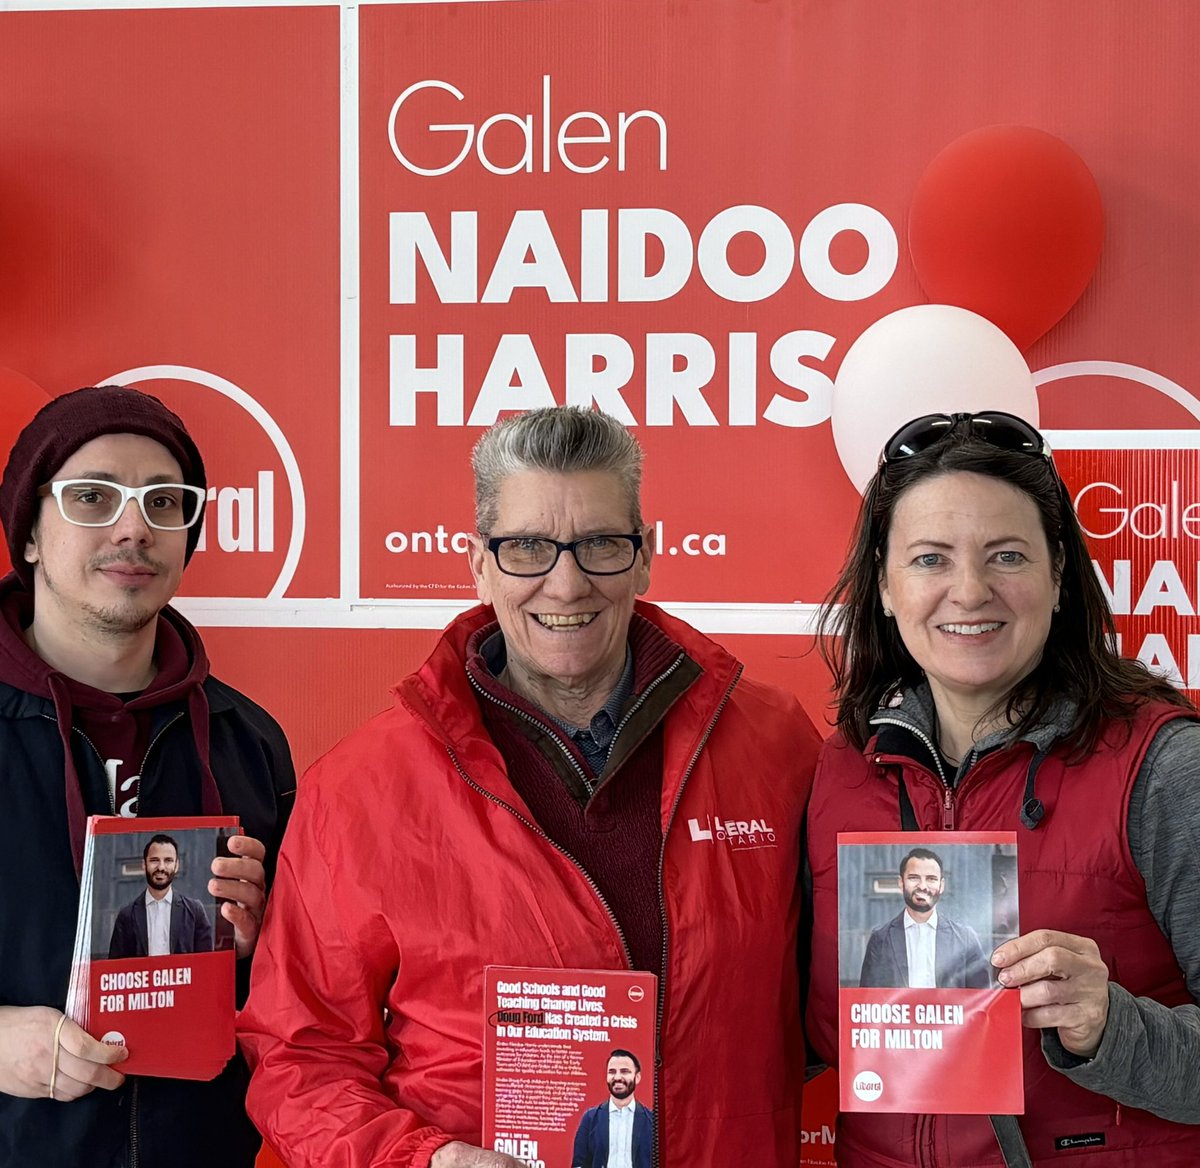 Happy to be hitting the streets of Milton to bring about a winning election result for @GalenNHarris @OntLiberal! Great reconnecting with @stephaniebowman and @RickWitman as we knock doors and let people know what a great candidate they have in Galen!